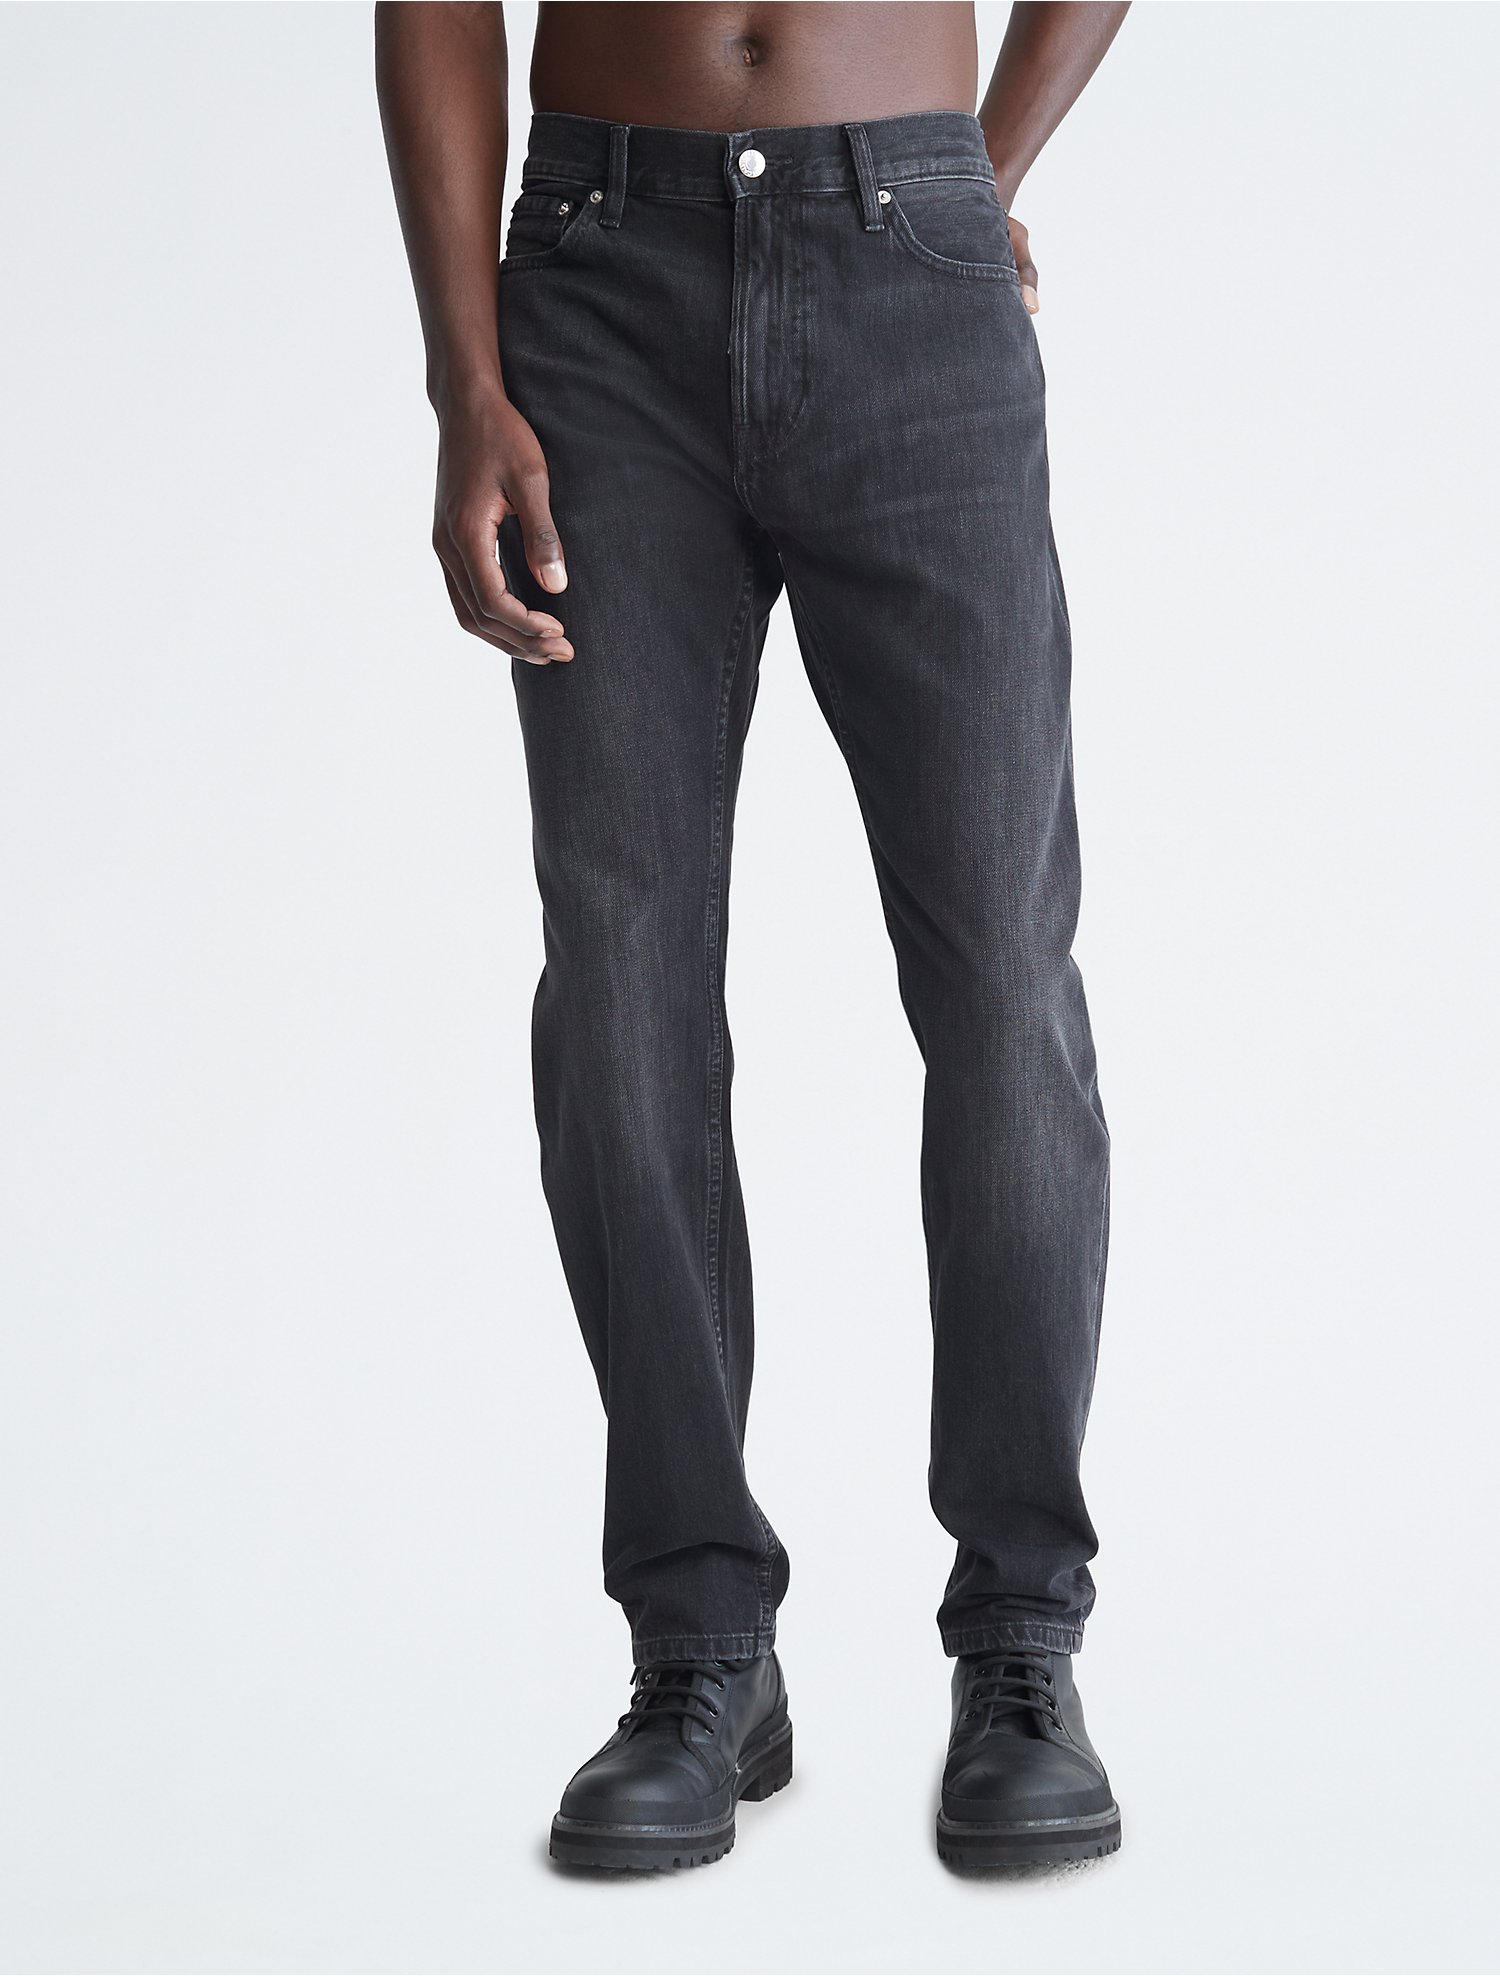 give Investere trappe Slim Straight Fit Black Stone Jeans | Calvin Klein